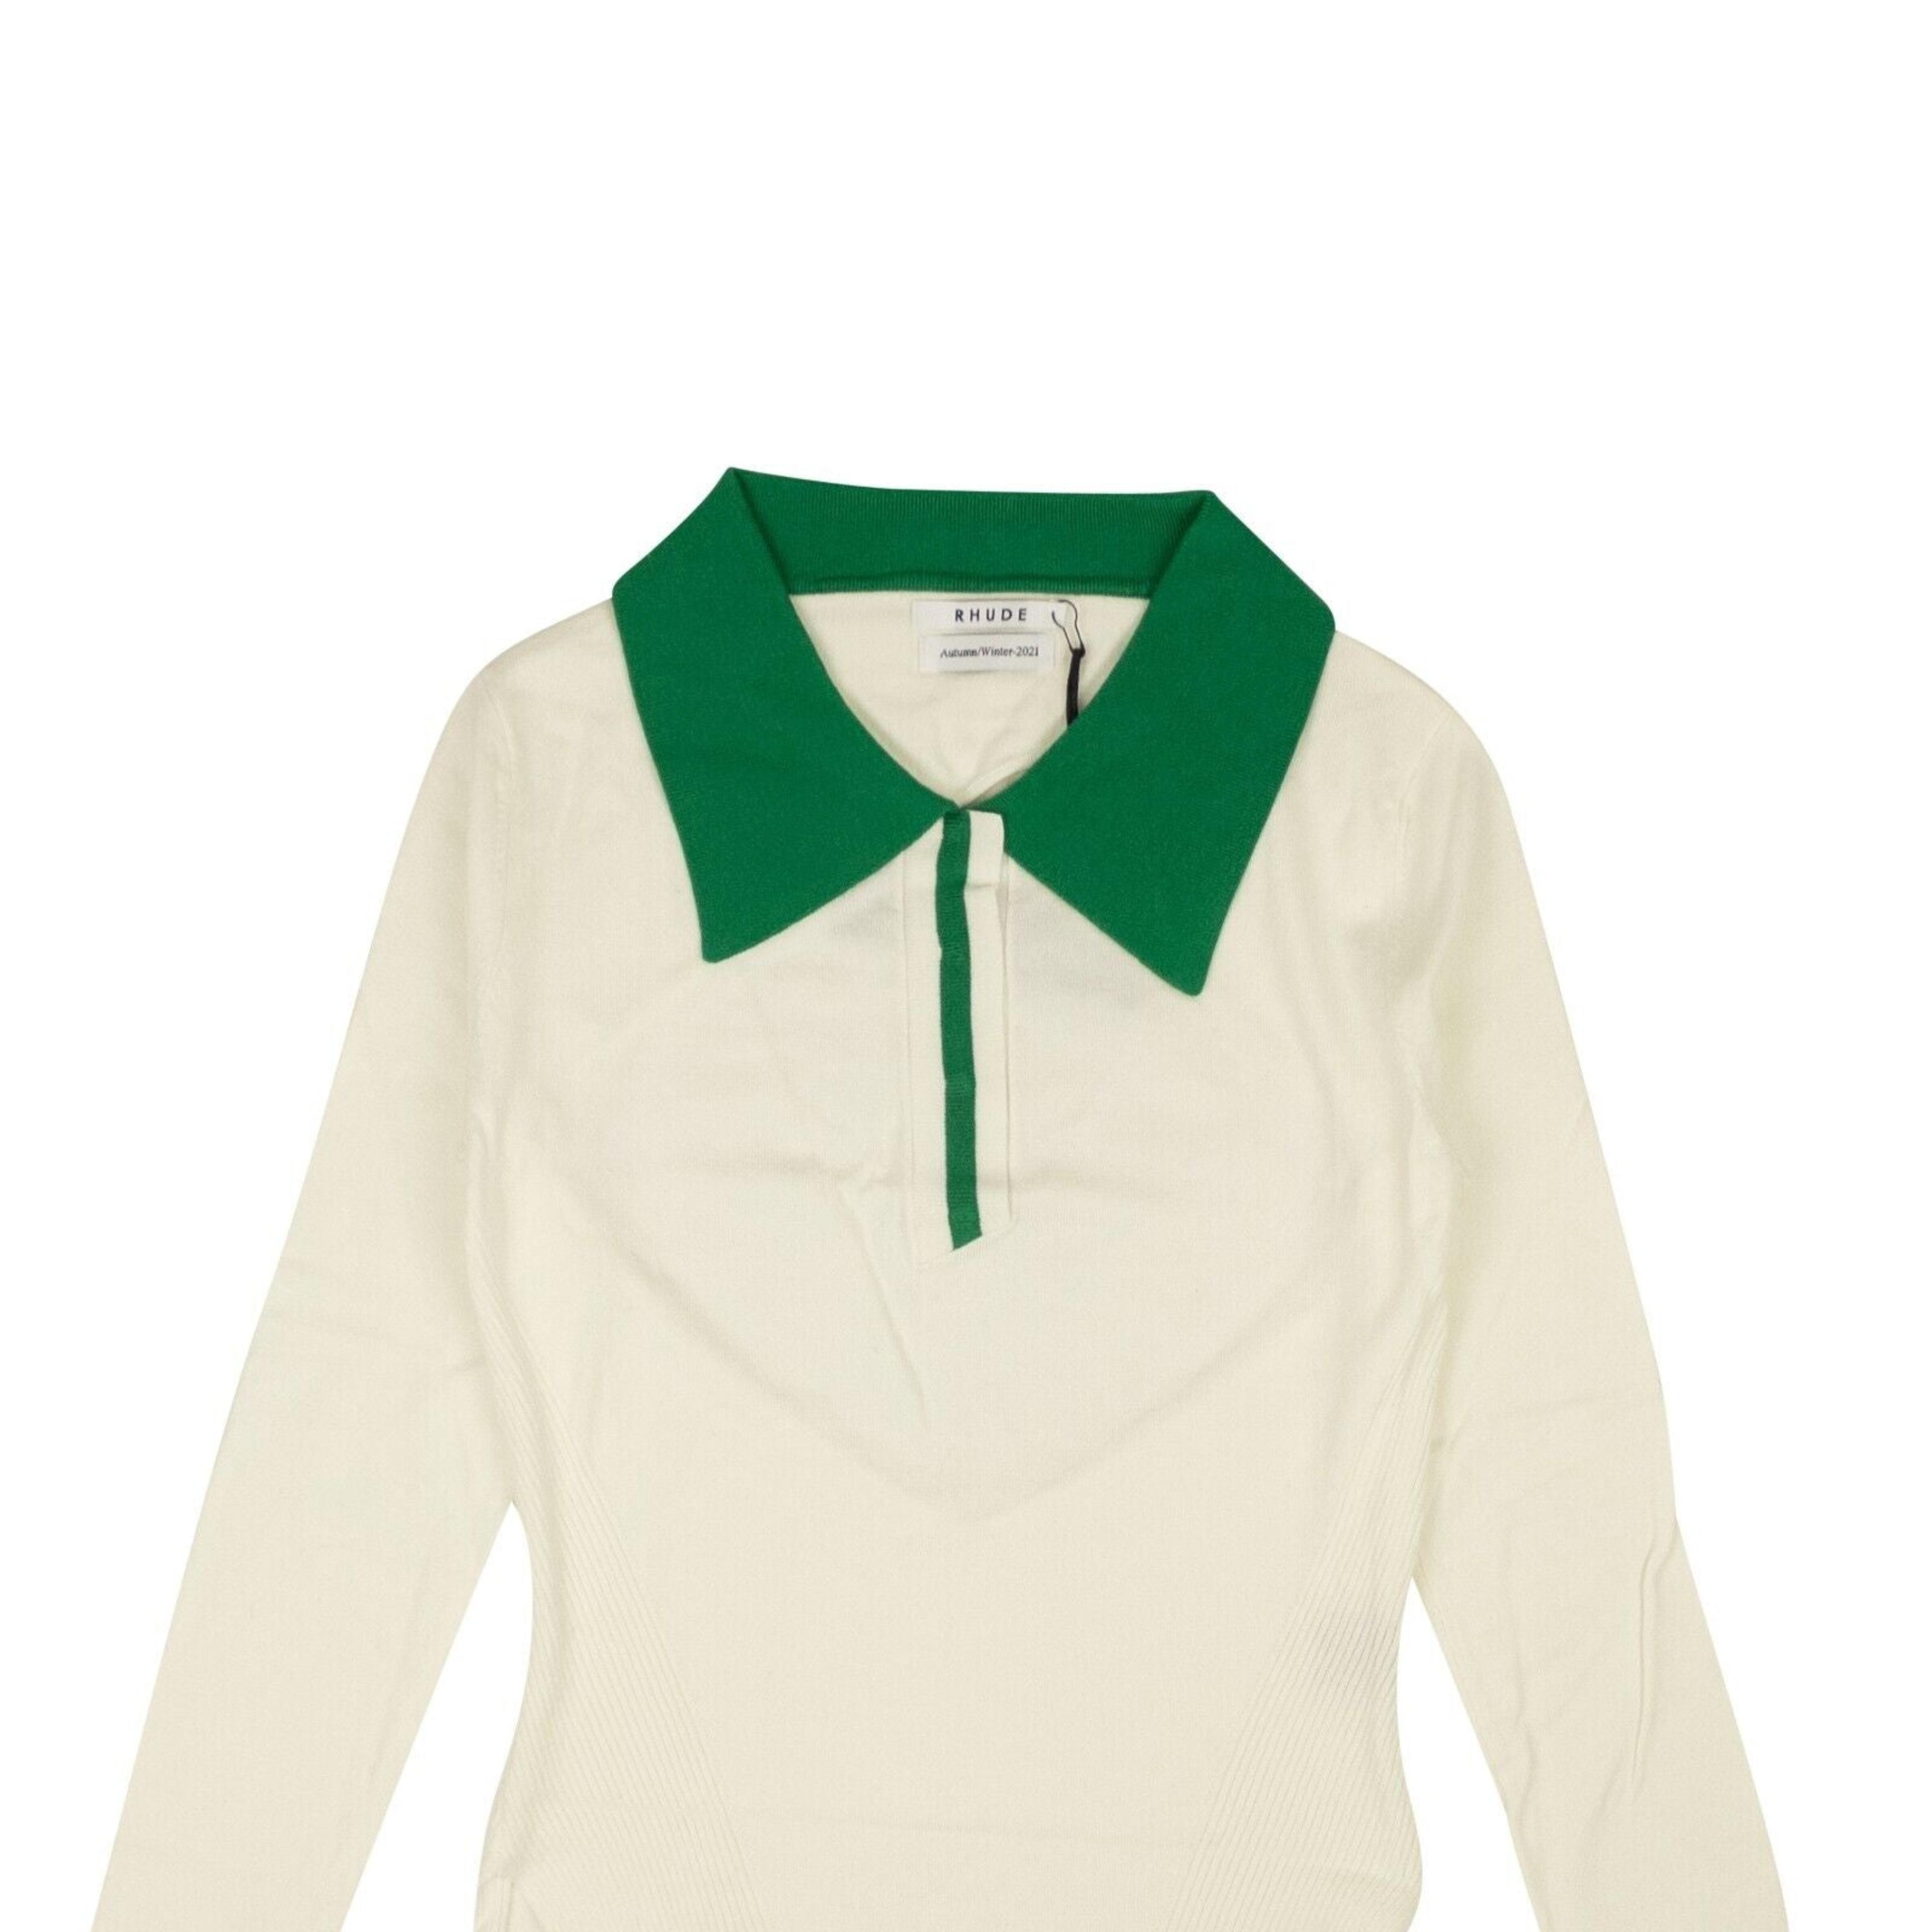 Alternate View 1 of Cream And Green Viscose F-1 Long Sleeve Polo Shirt